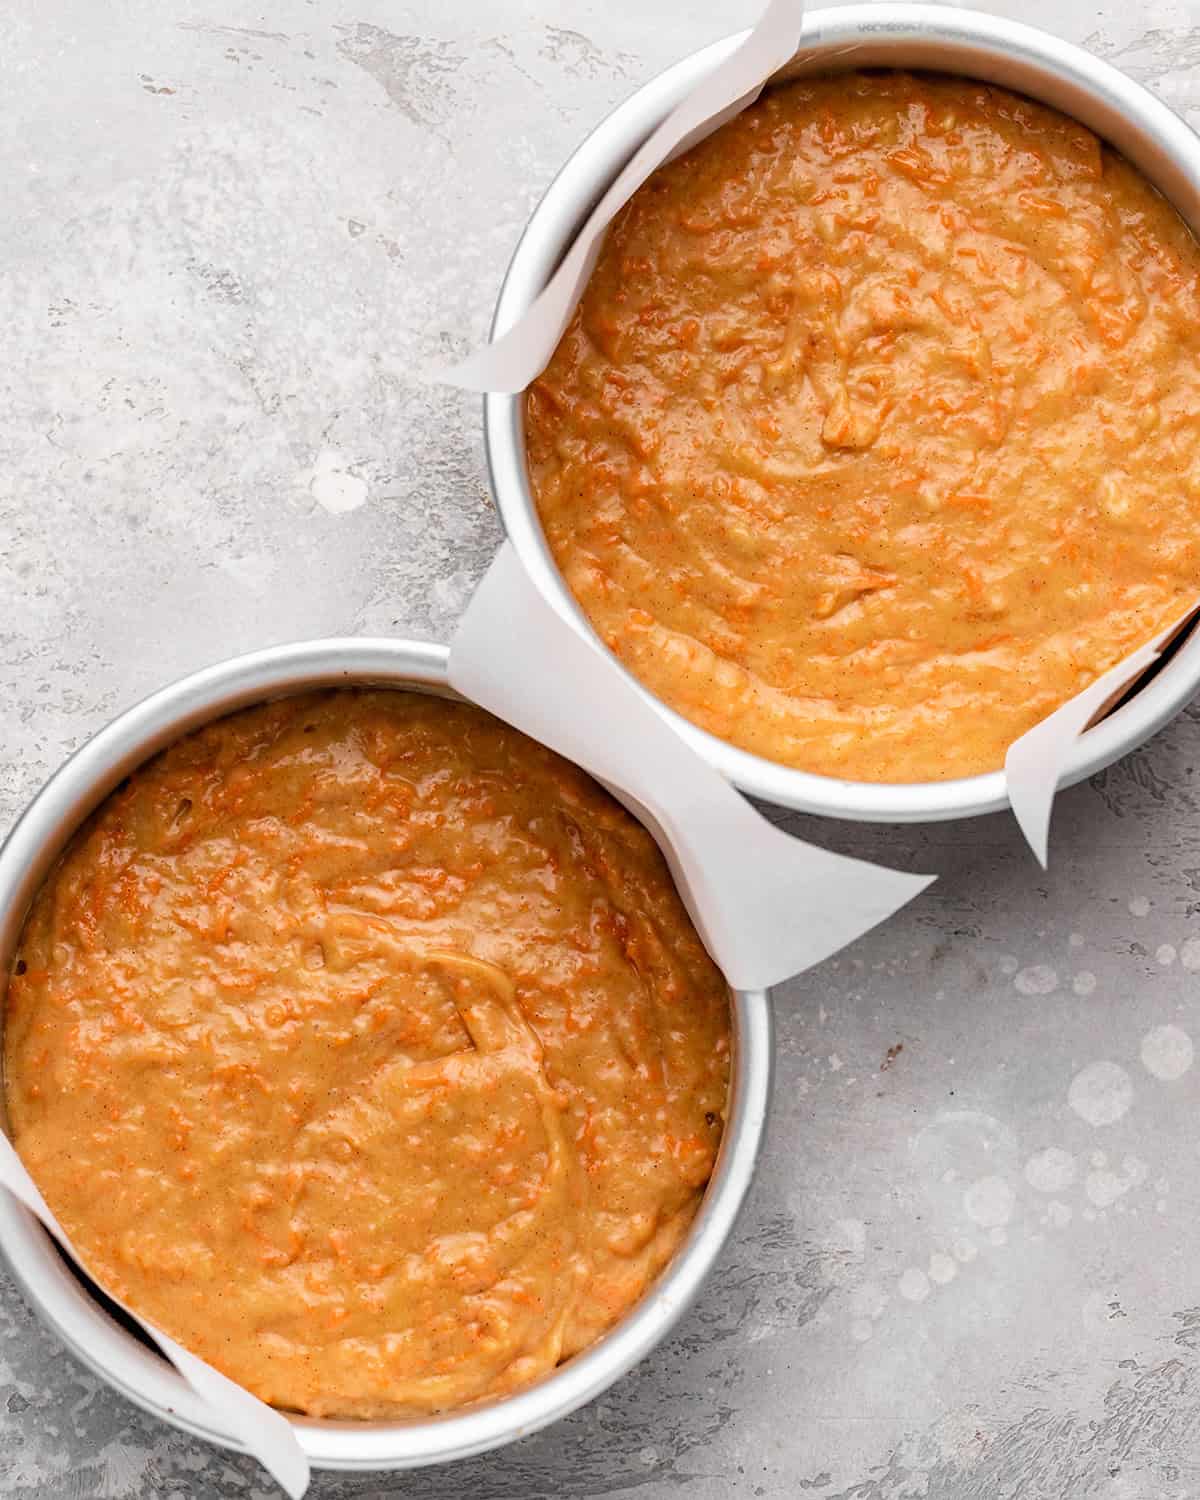 How to Make Gluten-Free Carrot Cake - batter in two cake pans before baking